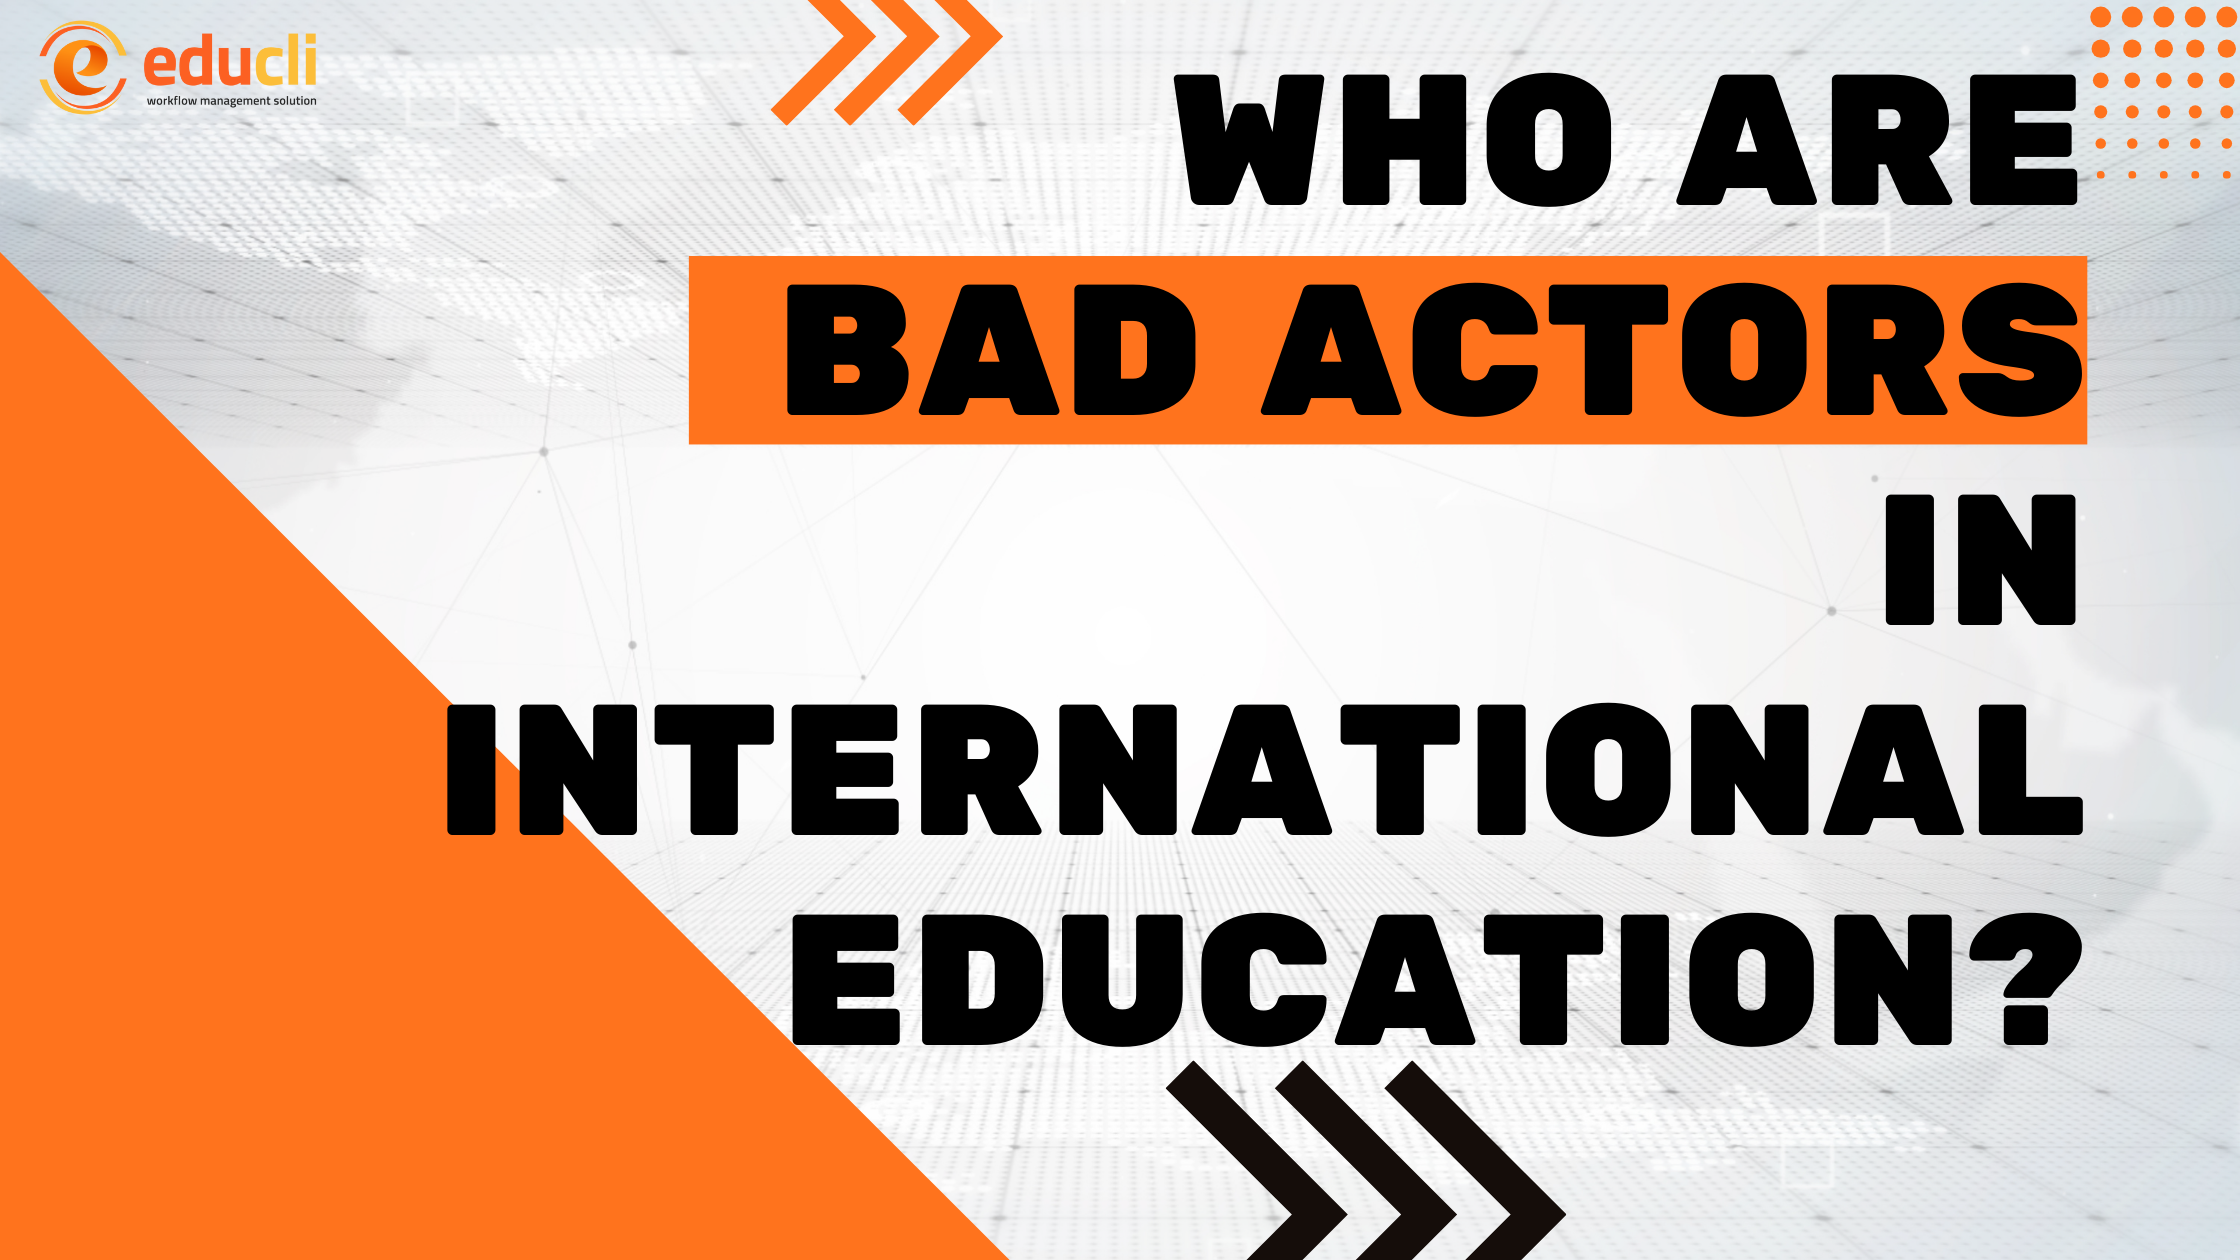 Who are bad actors in international education?